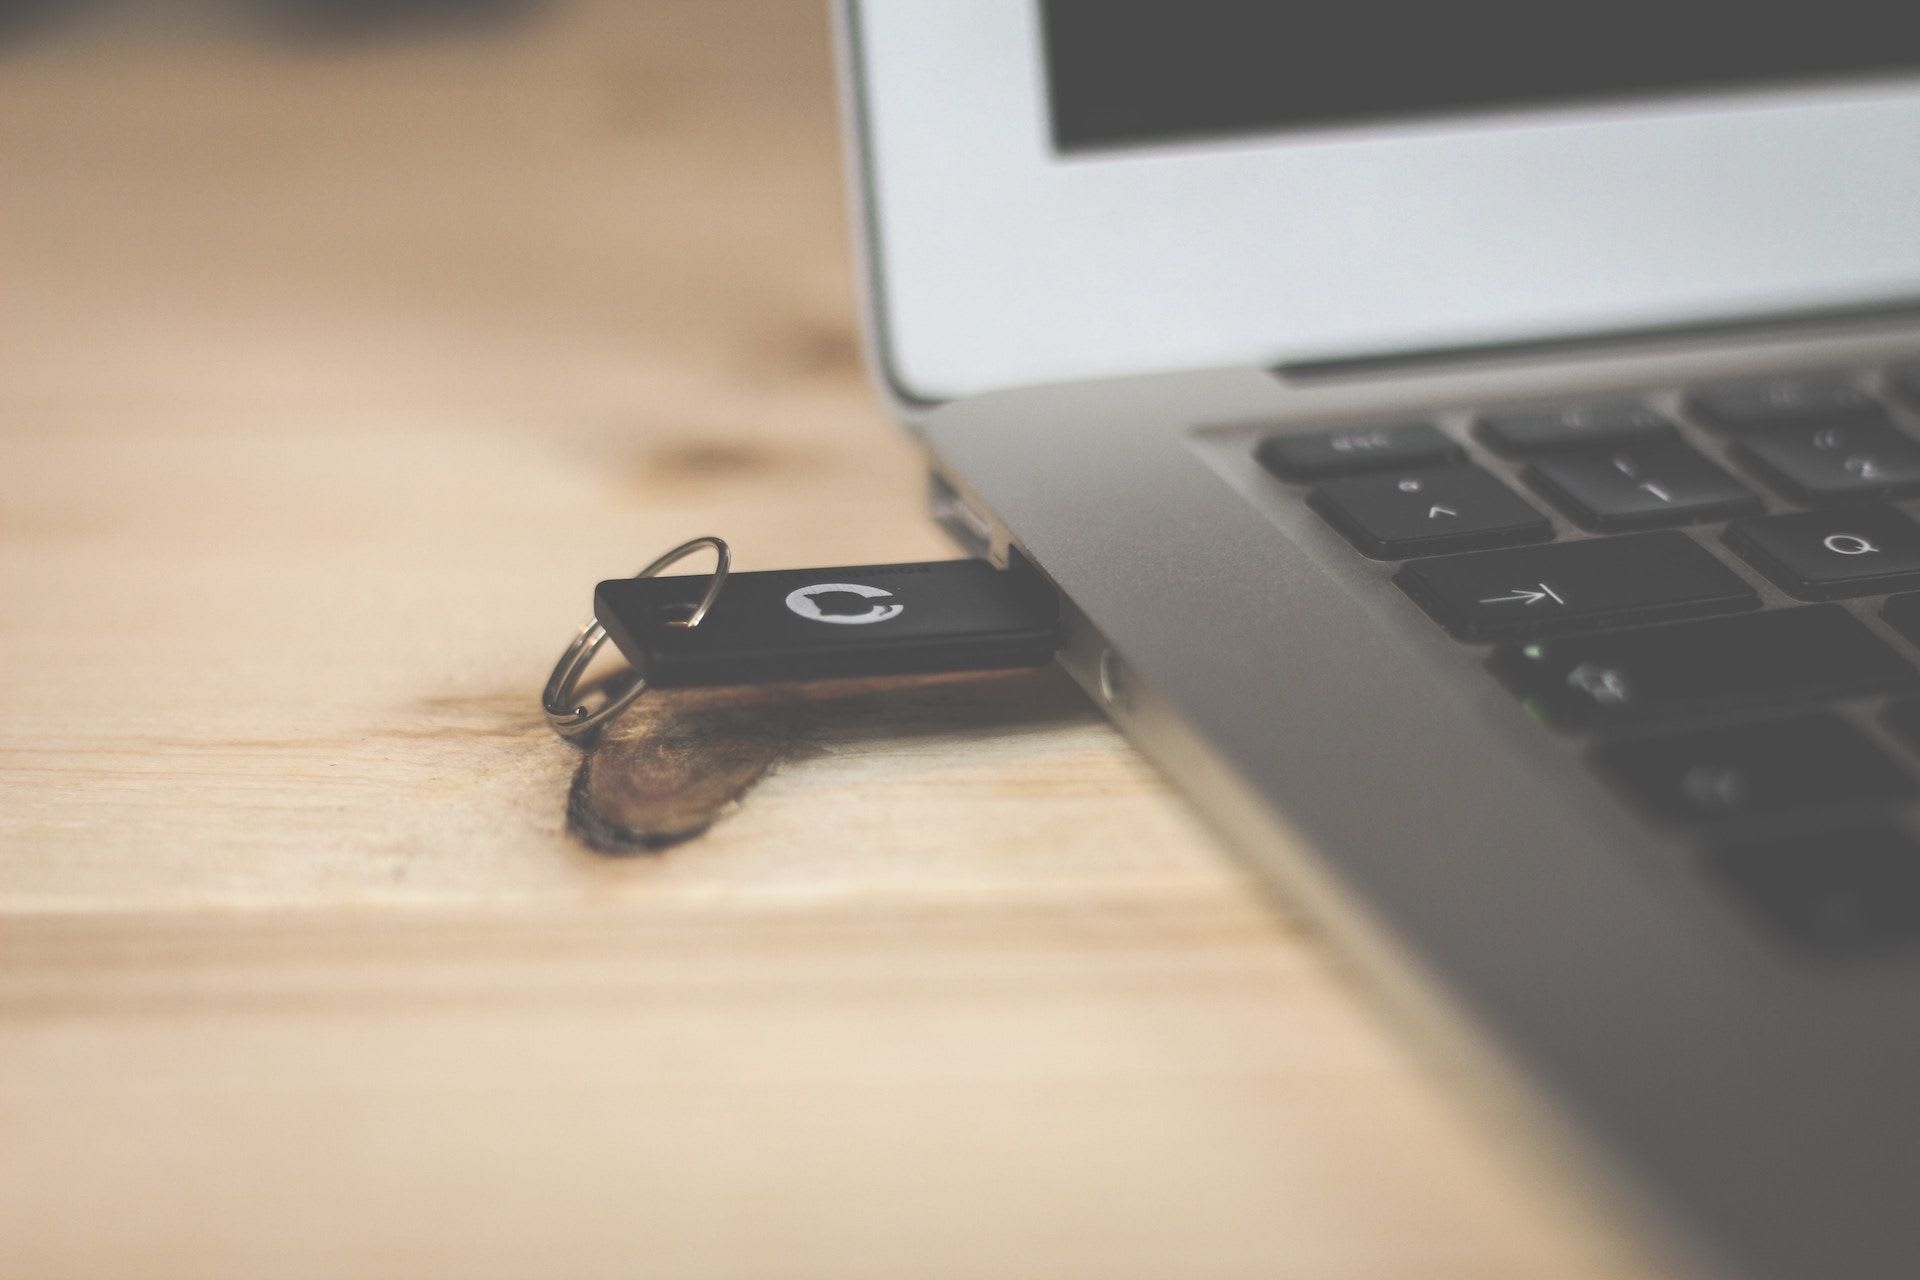 Unlock your Desktop with a USB Drive